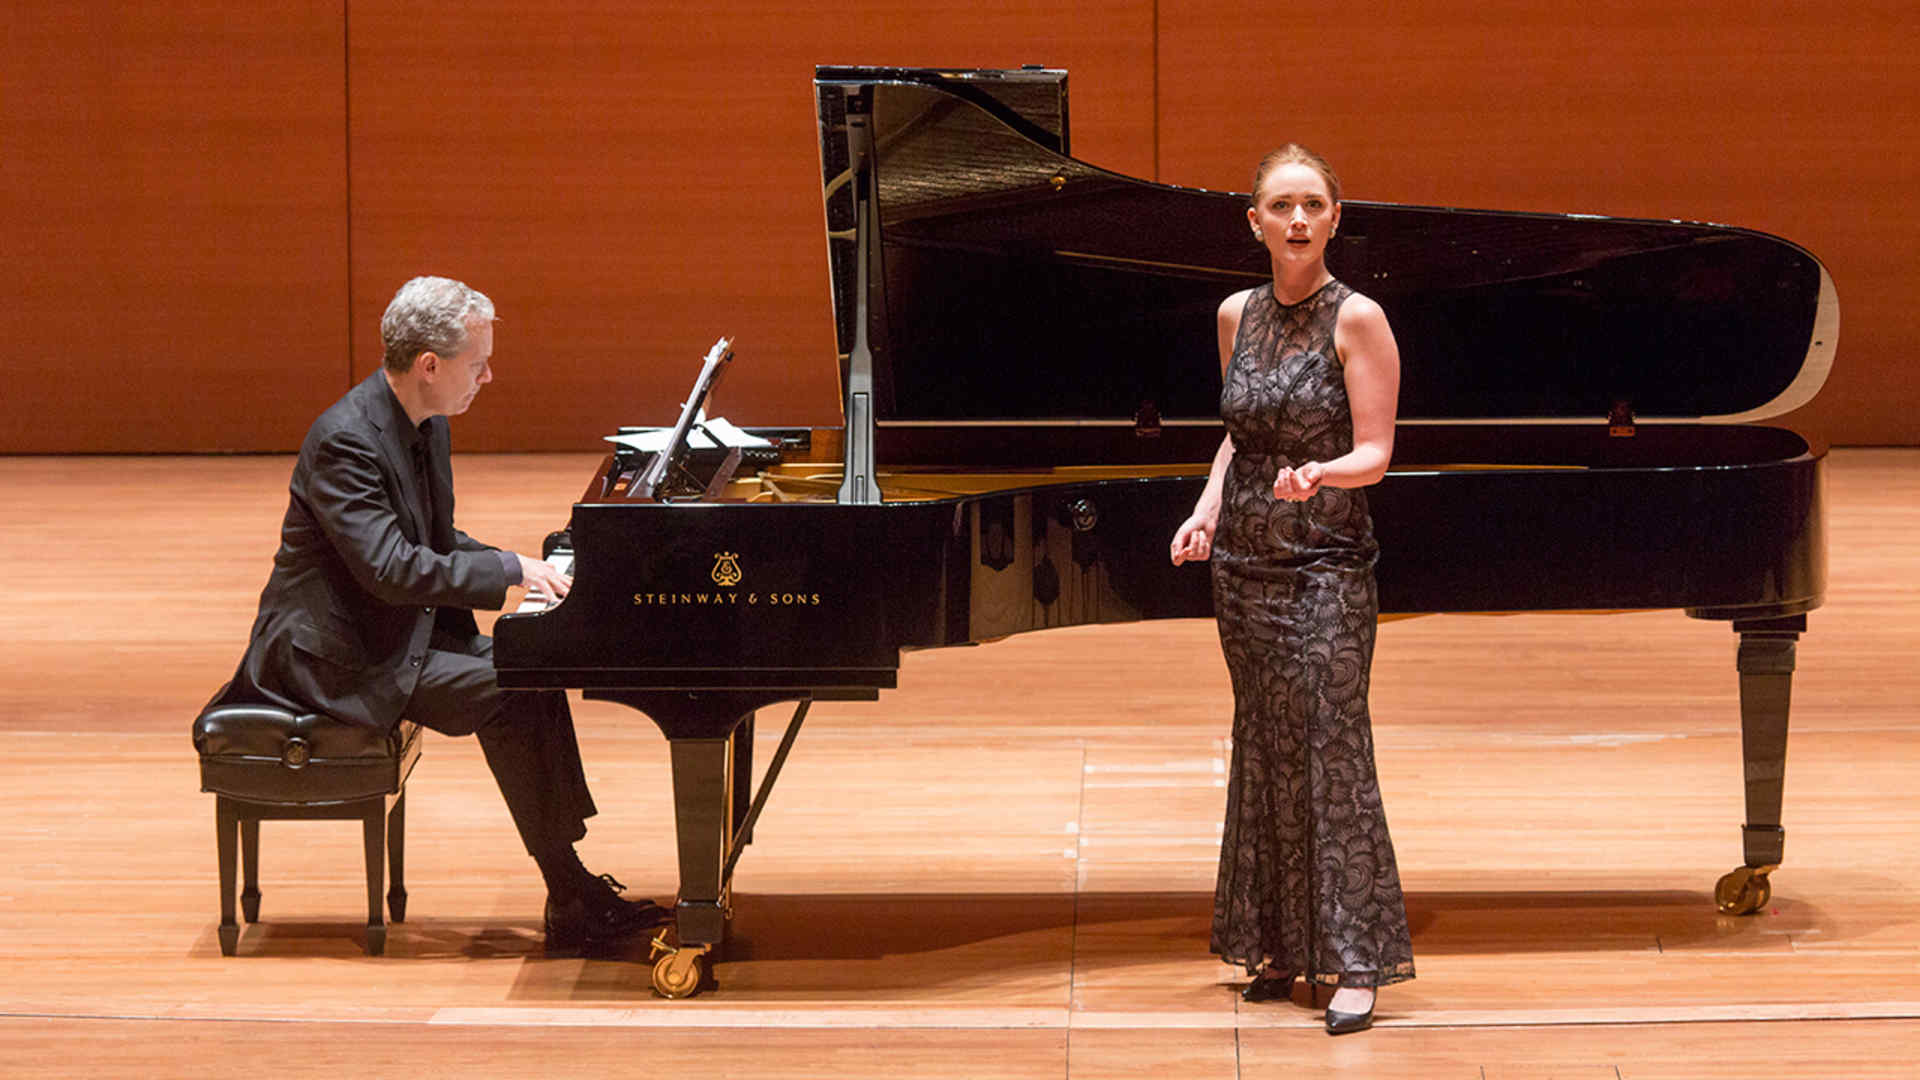 Juilliard Songfest, at Lincoln Center